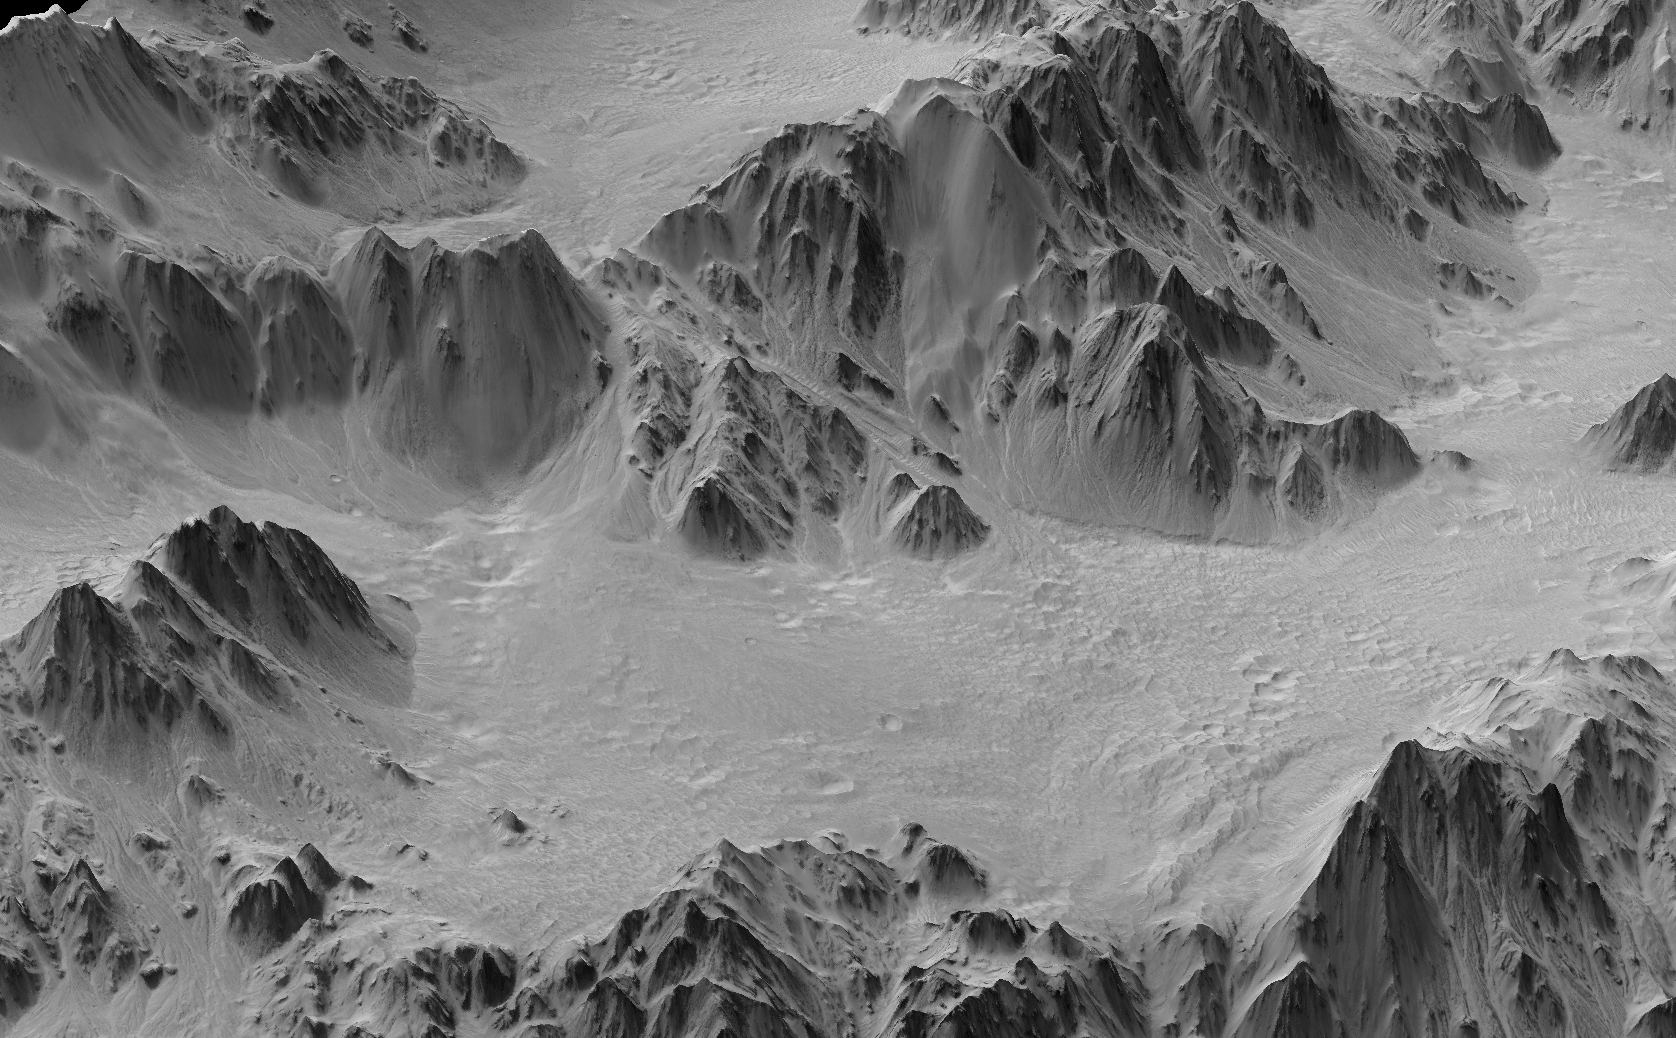 A digital terrain model generated from a stereo pair of images provides this synthesized, oblique view of a portion of the wall terraces of Mojave Crater in the Xanthe Terra region of Mars.